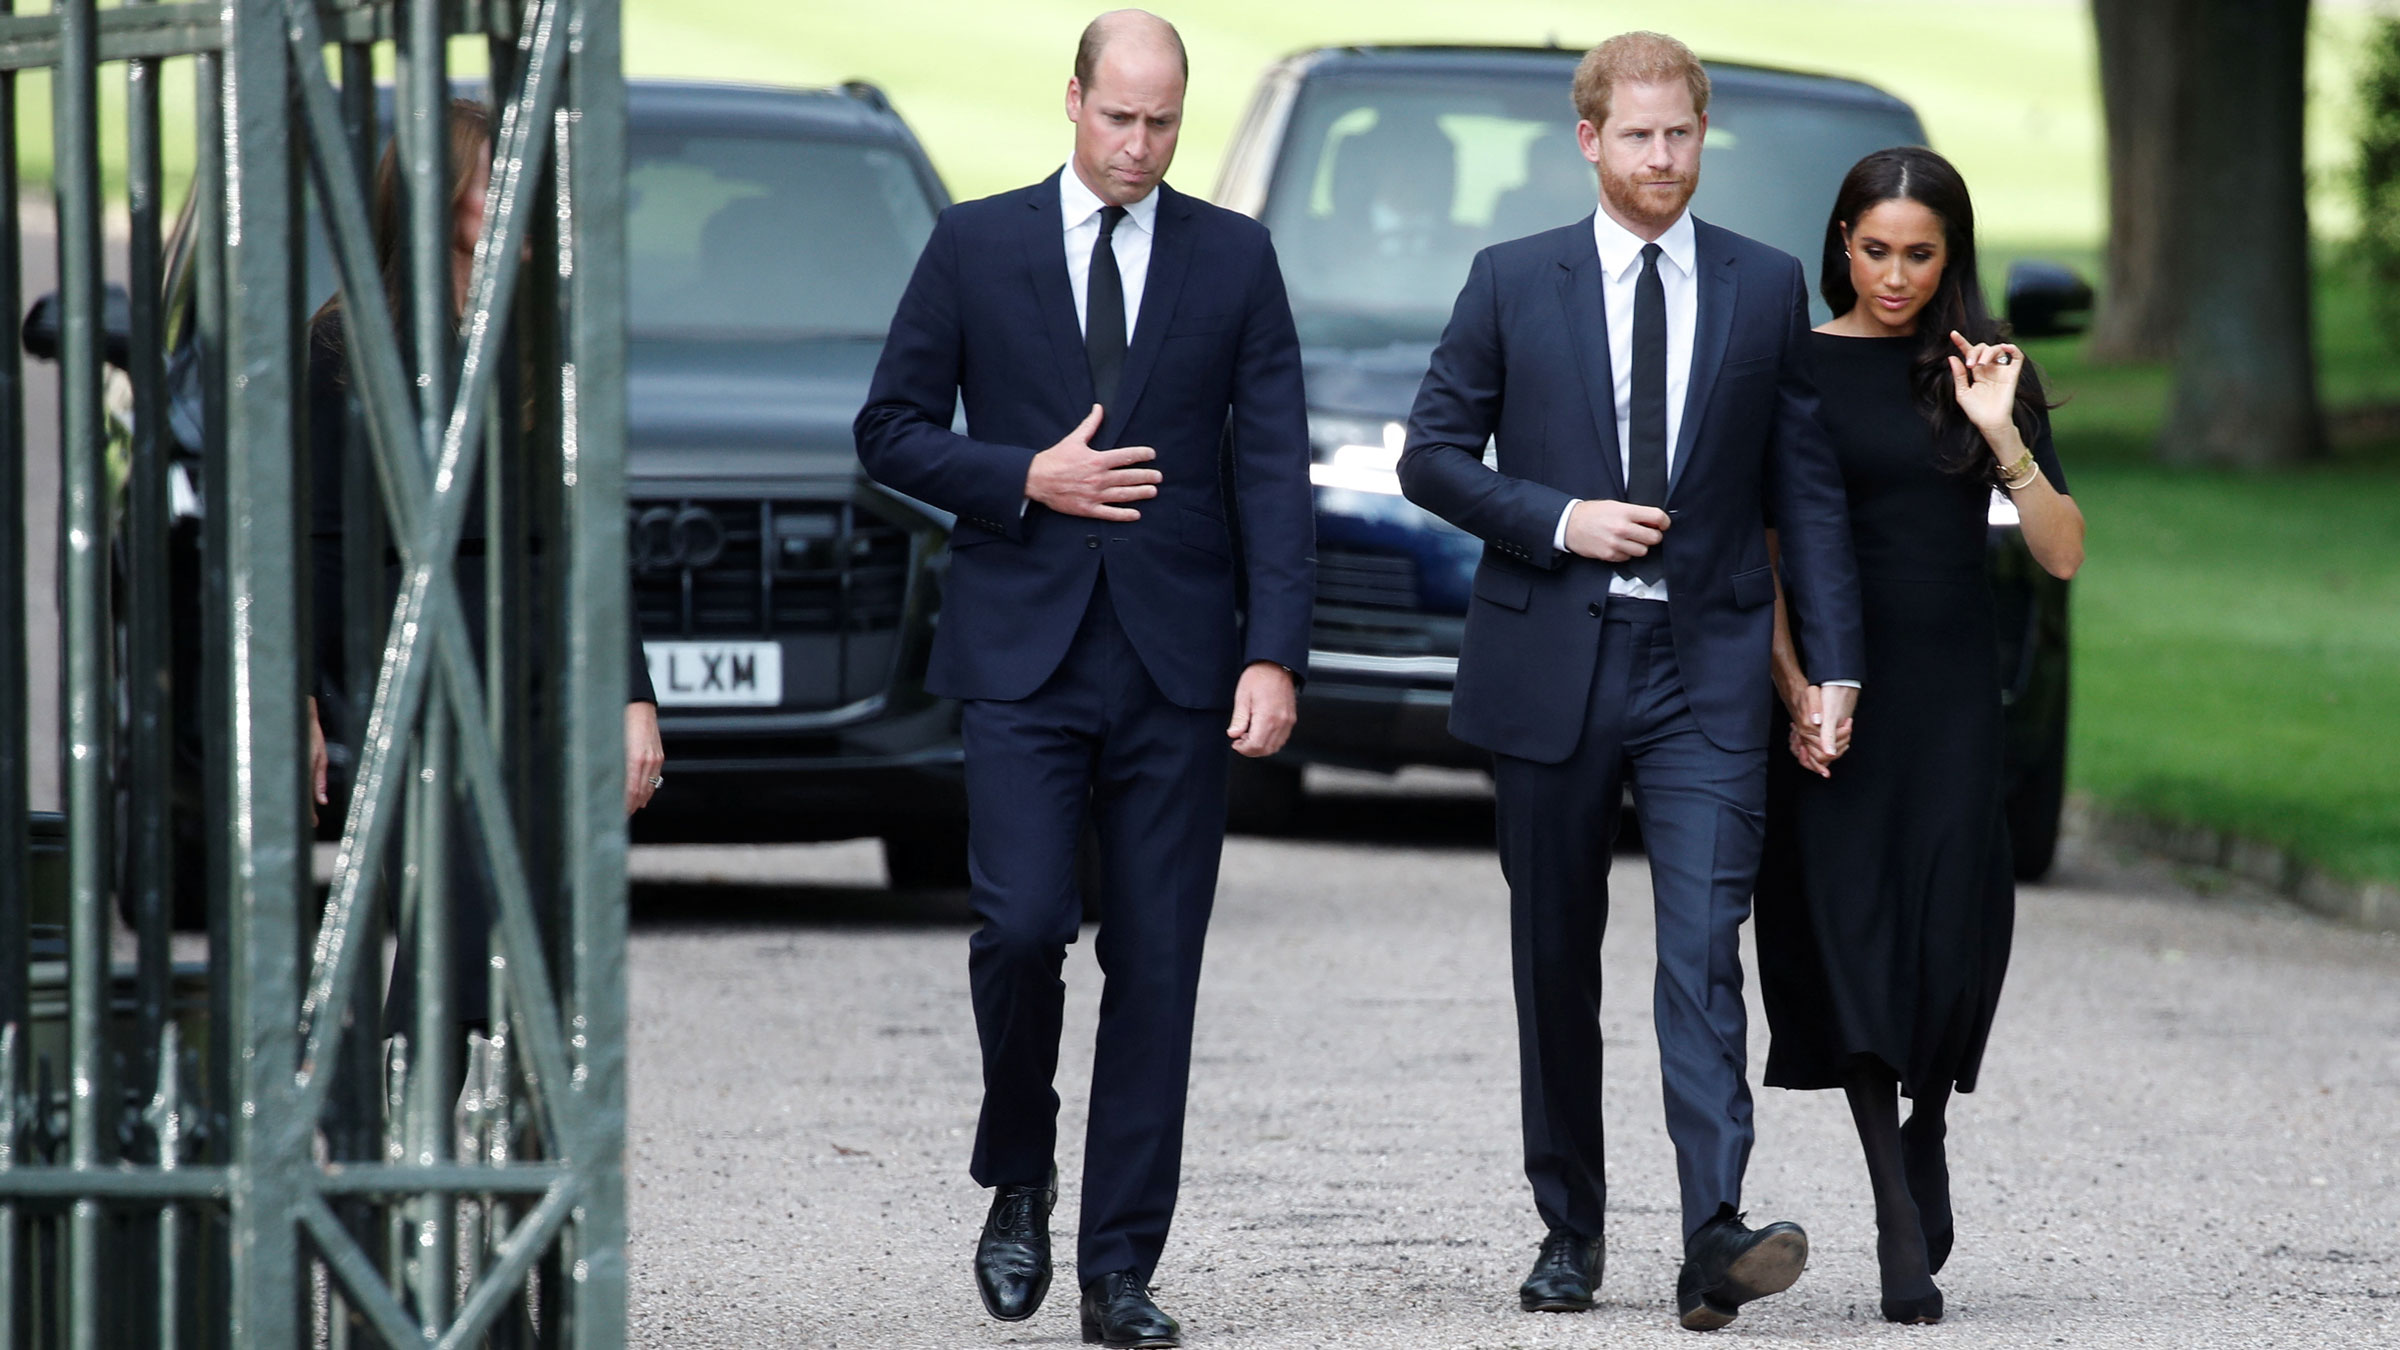 Prince William walks with his brother, Prince Harry, and Meghan, the Duchess of Sussex, on Saturday.